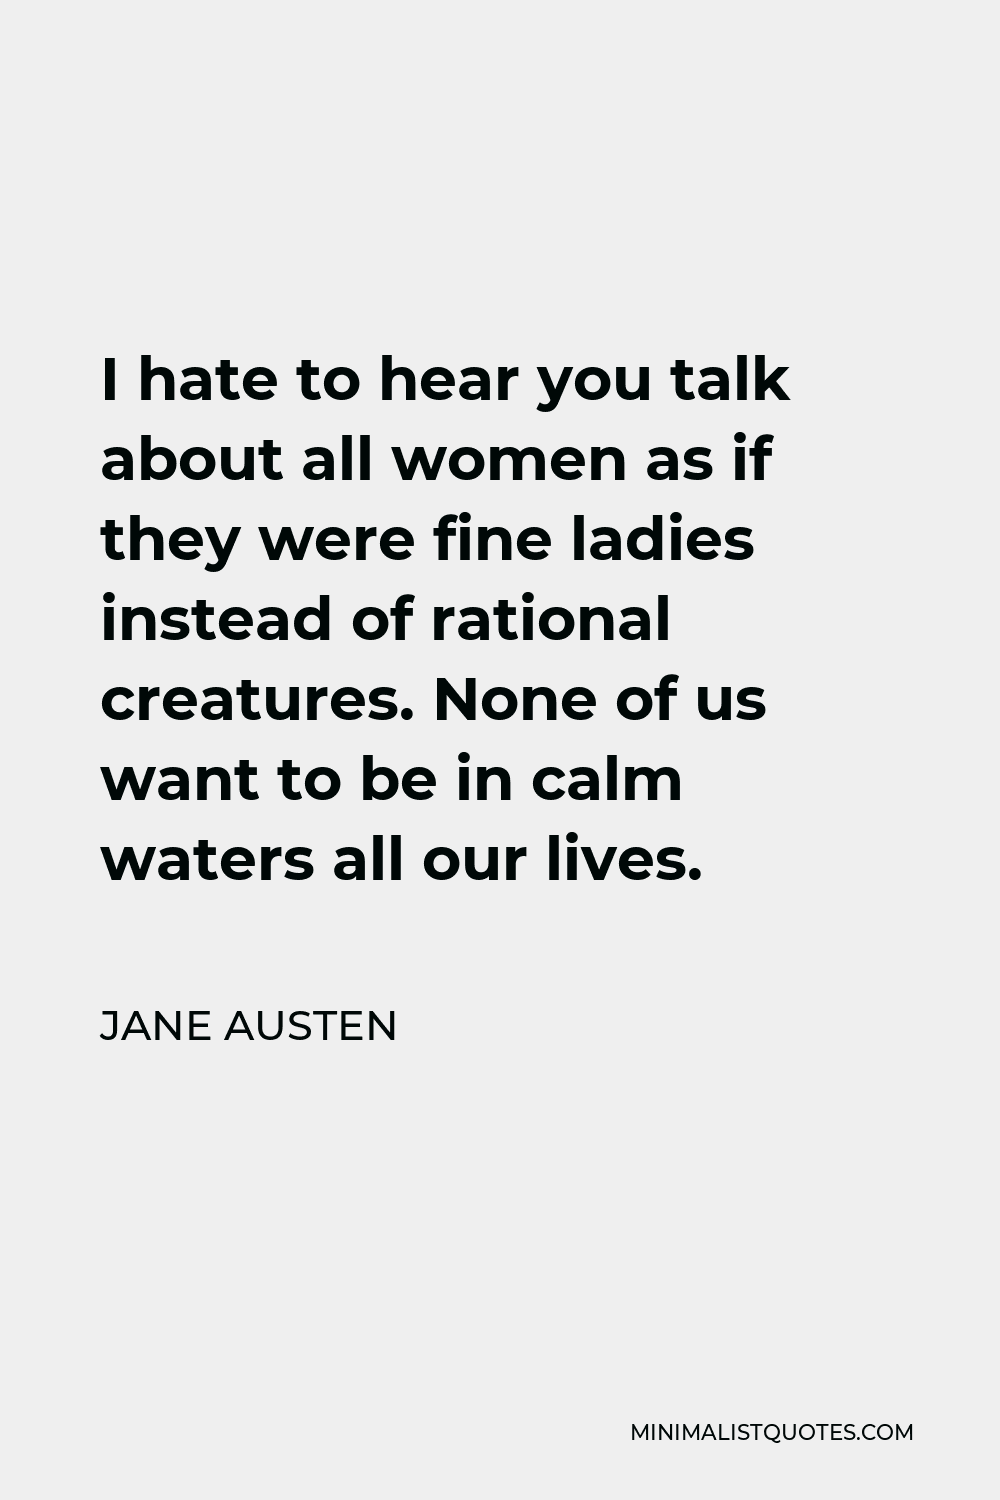 Jane Austen Quote - I hate to hear you talk about all women as if they were fine ladies instead of rational creatures. None of us want to be in calm waters all our lives.